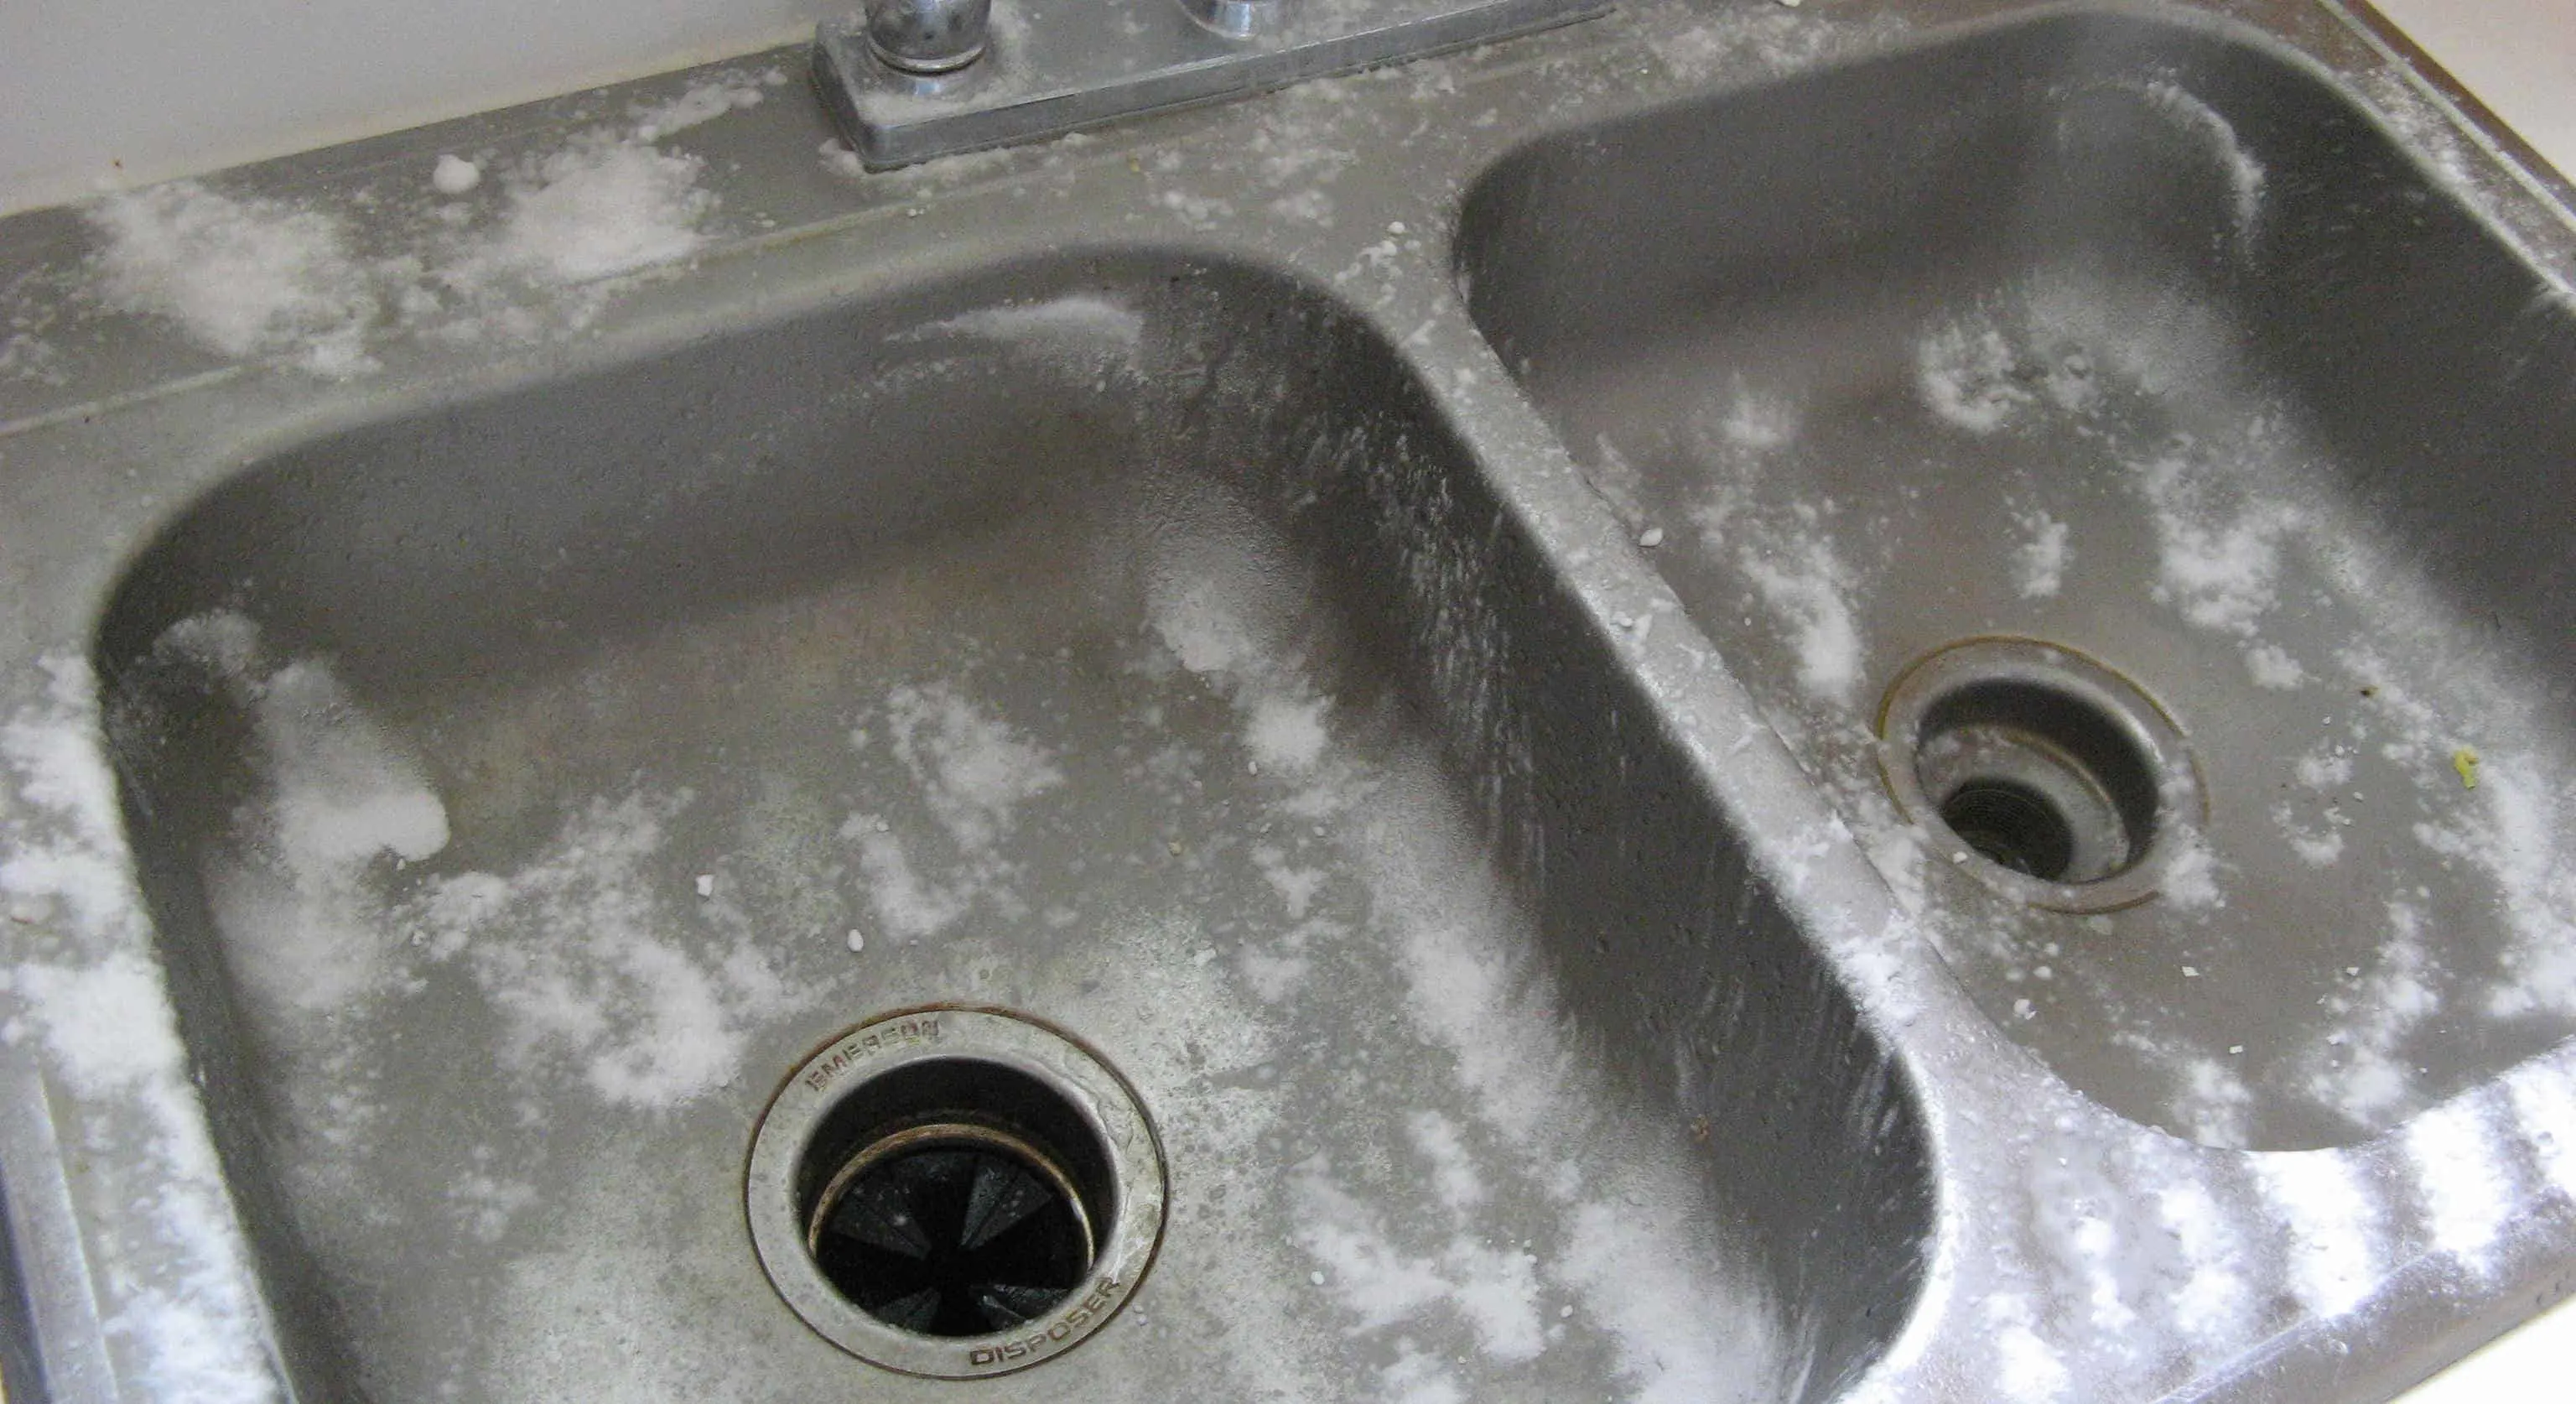 Wash Sink With vinegar and baking soda